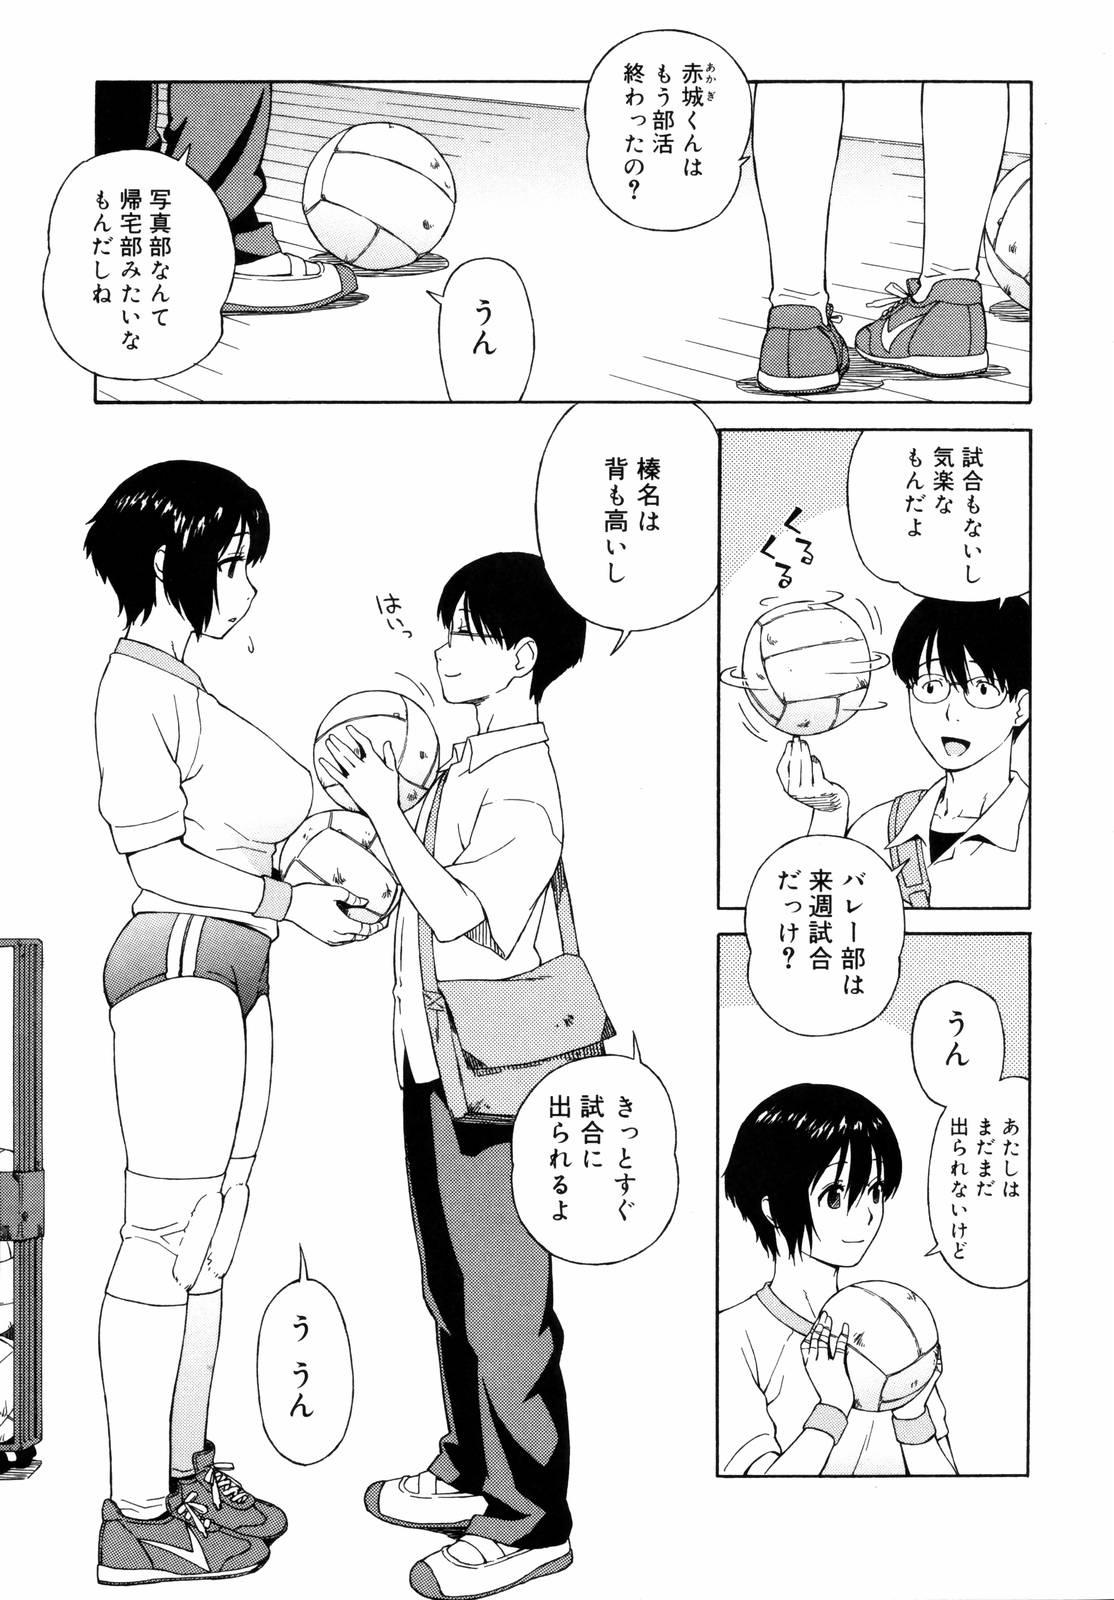 Celebrity Shishunki wa Hatsujouki. - Adolescence is a sexual excitement period. Groping - Page 11